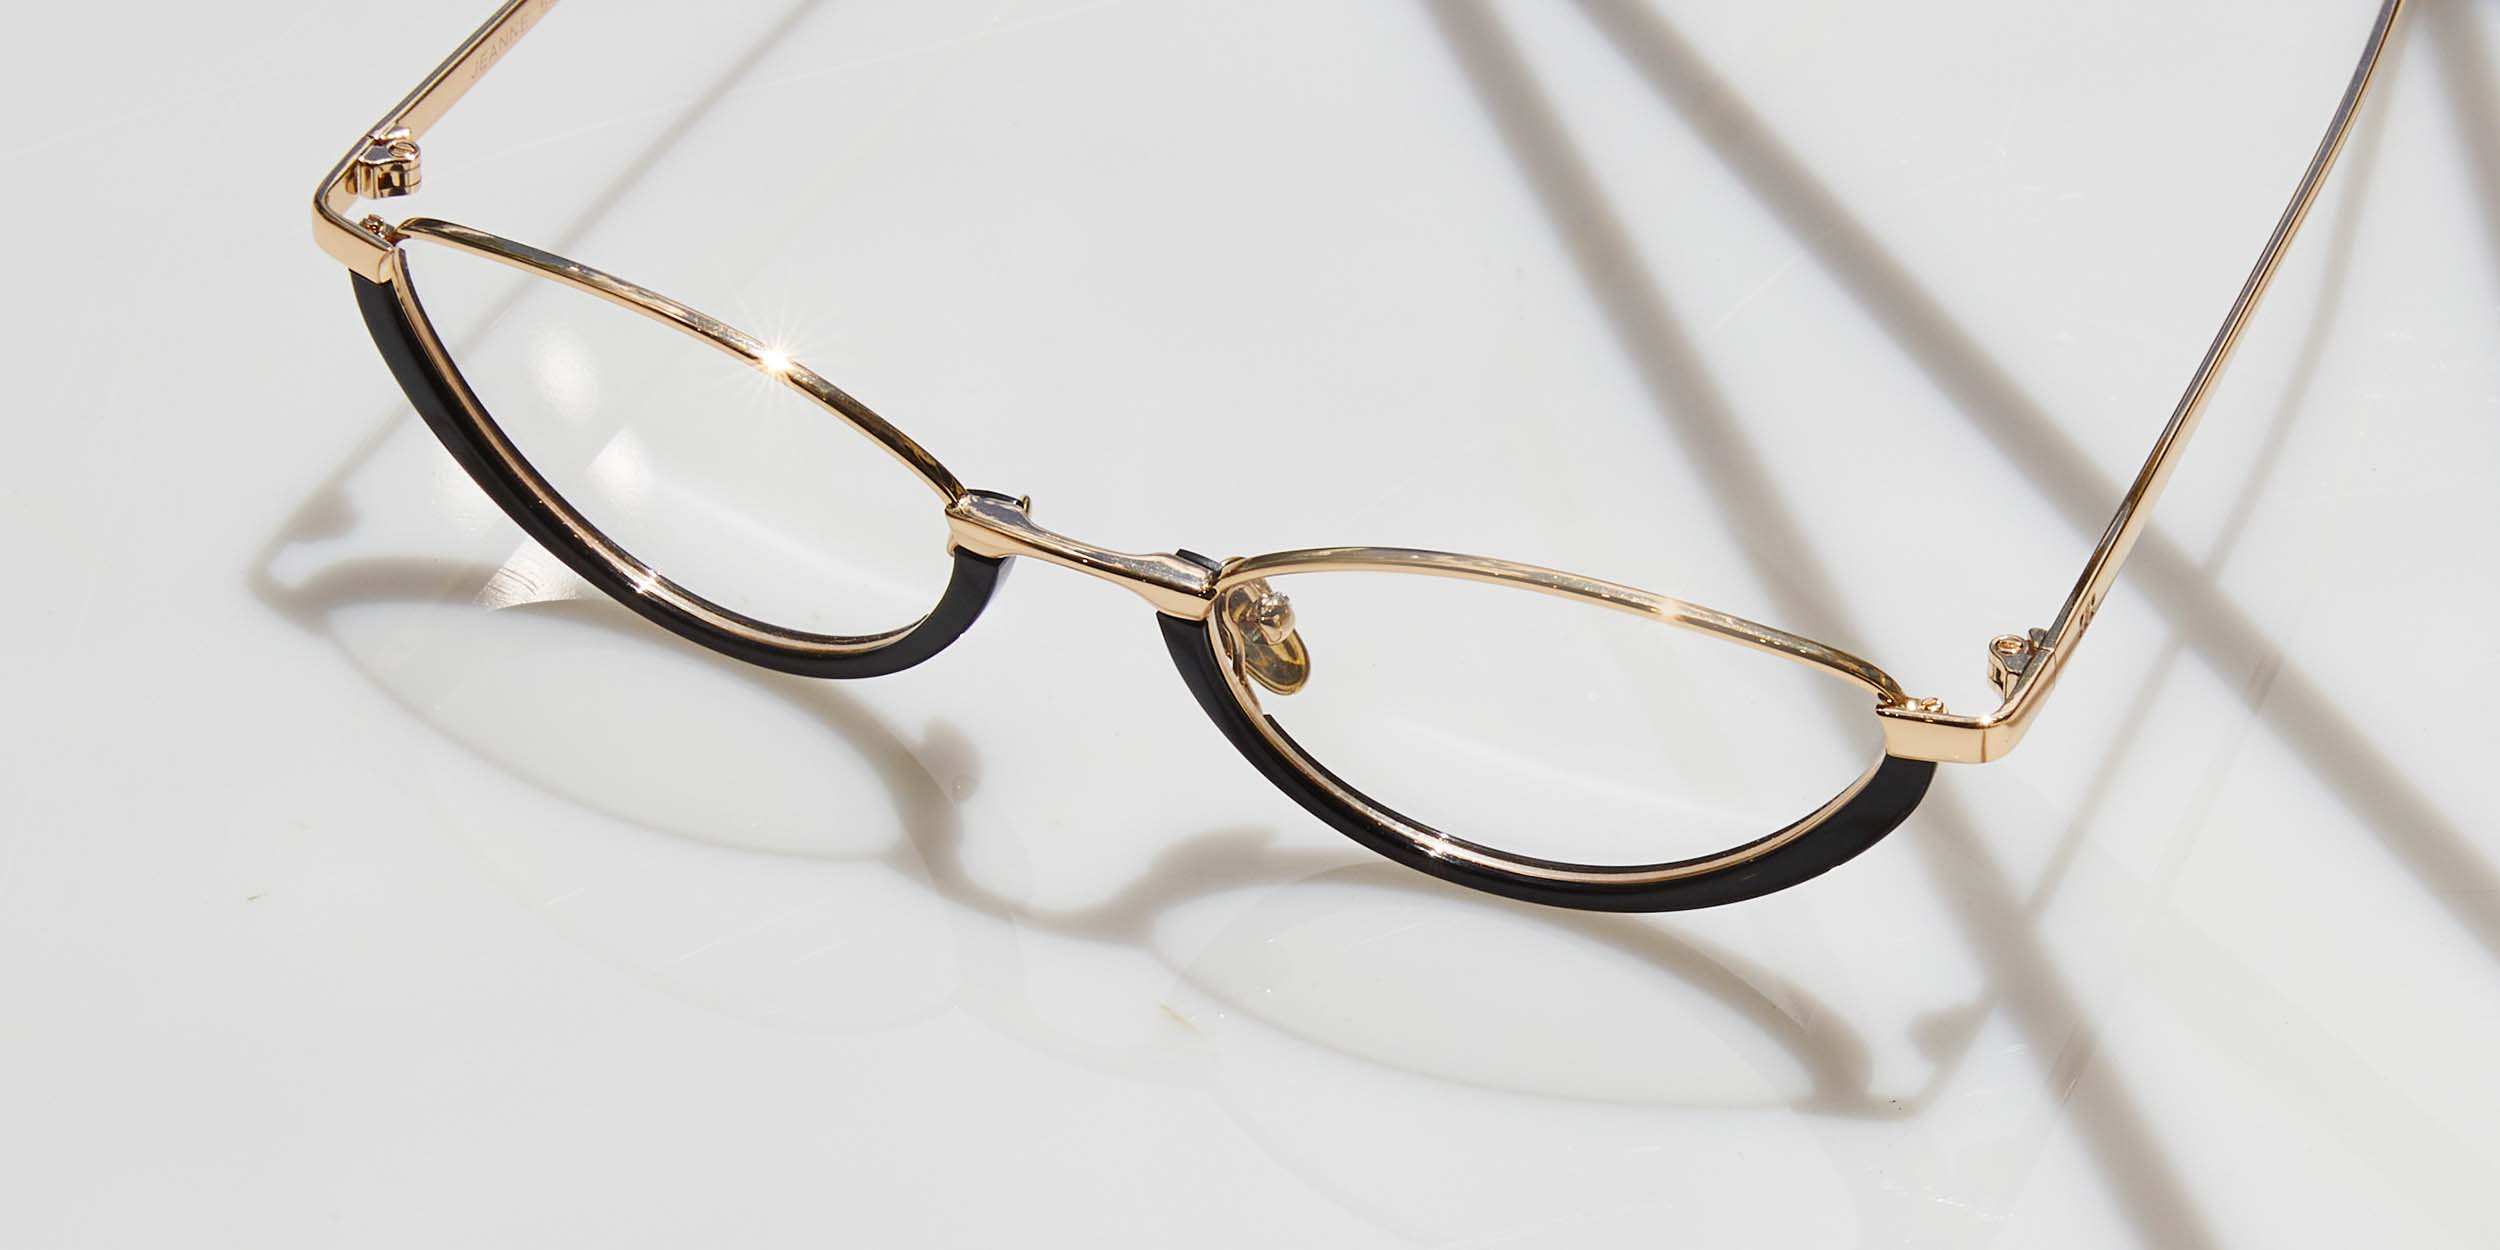 Photo Details of Jeanne Red & Gold Reading Glasses in a room